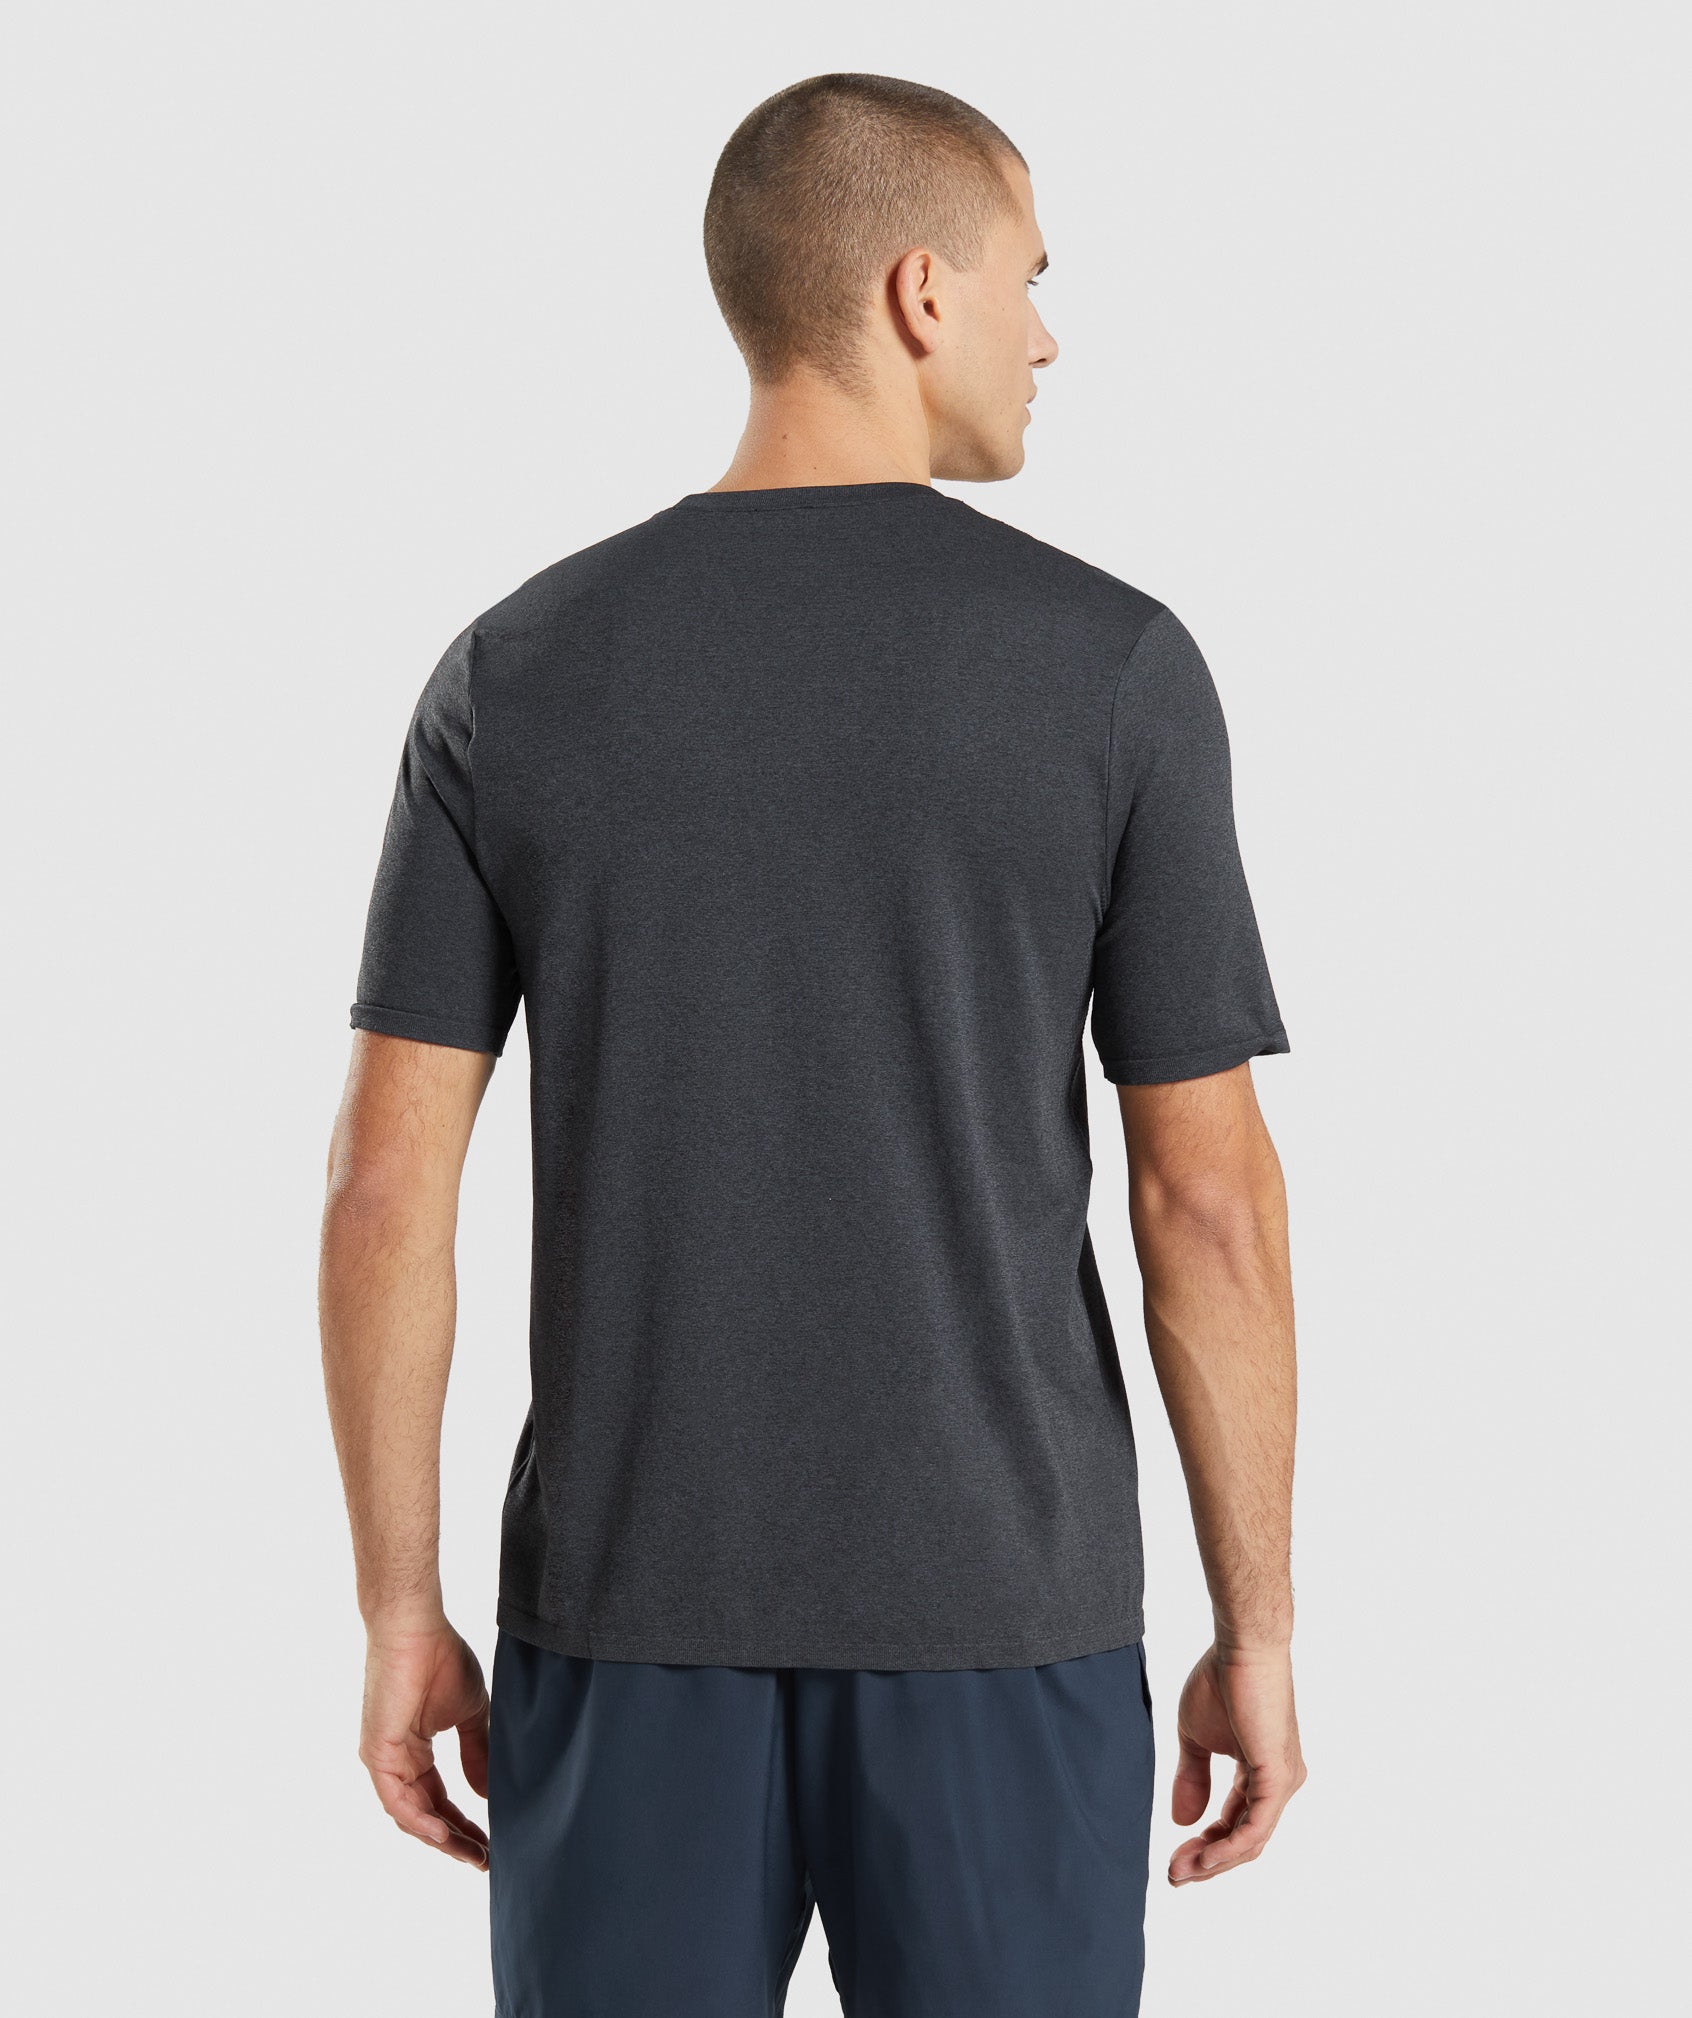 Arrival Seamless T-Shirt in Black Marl - view 2